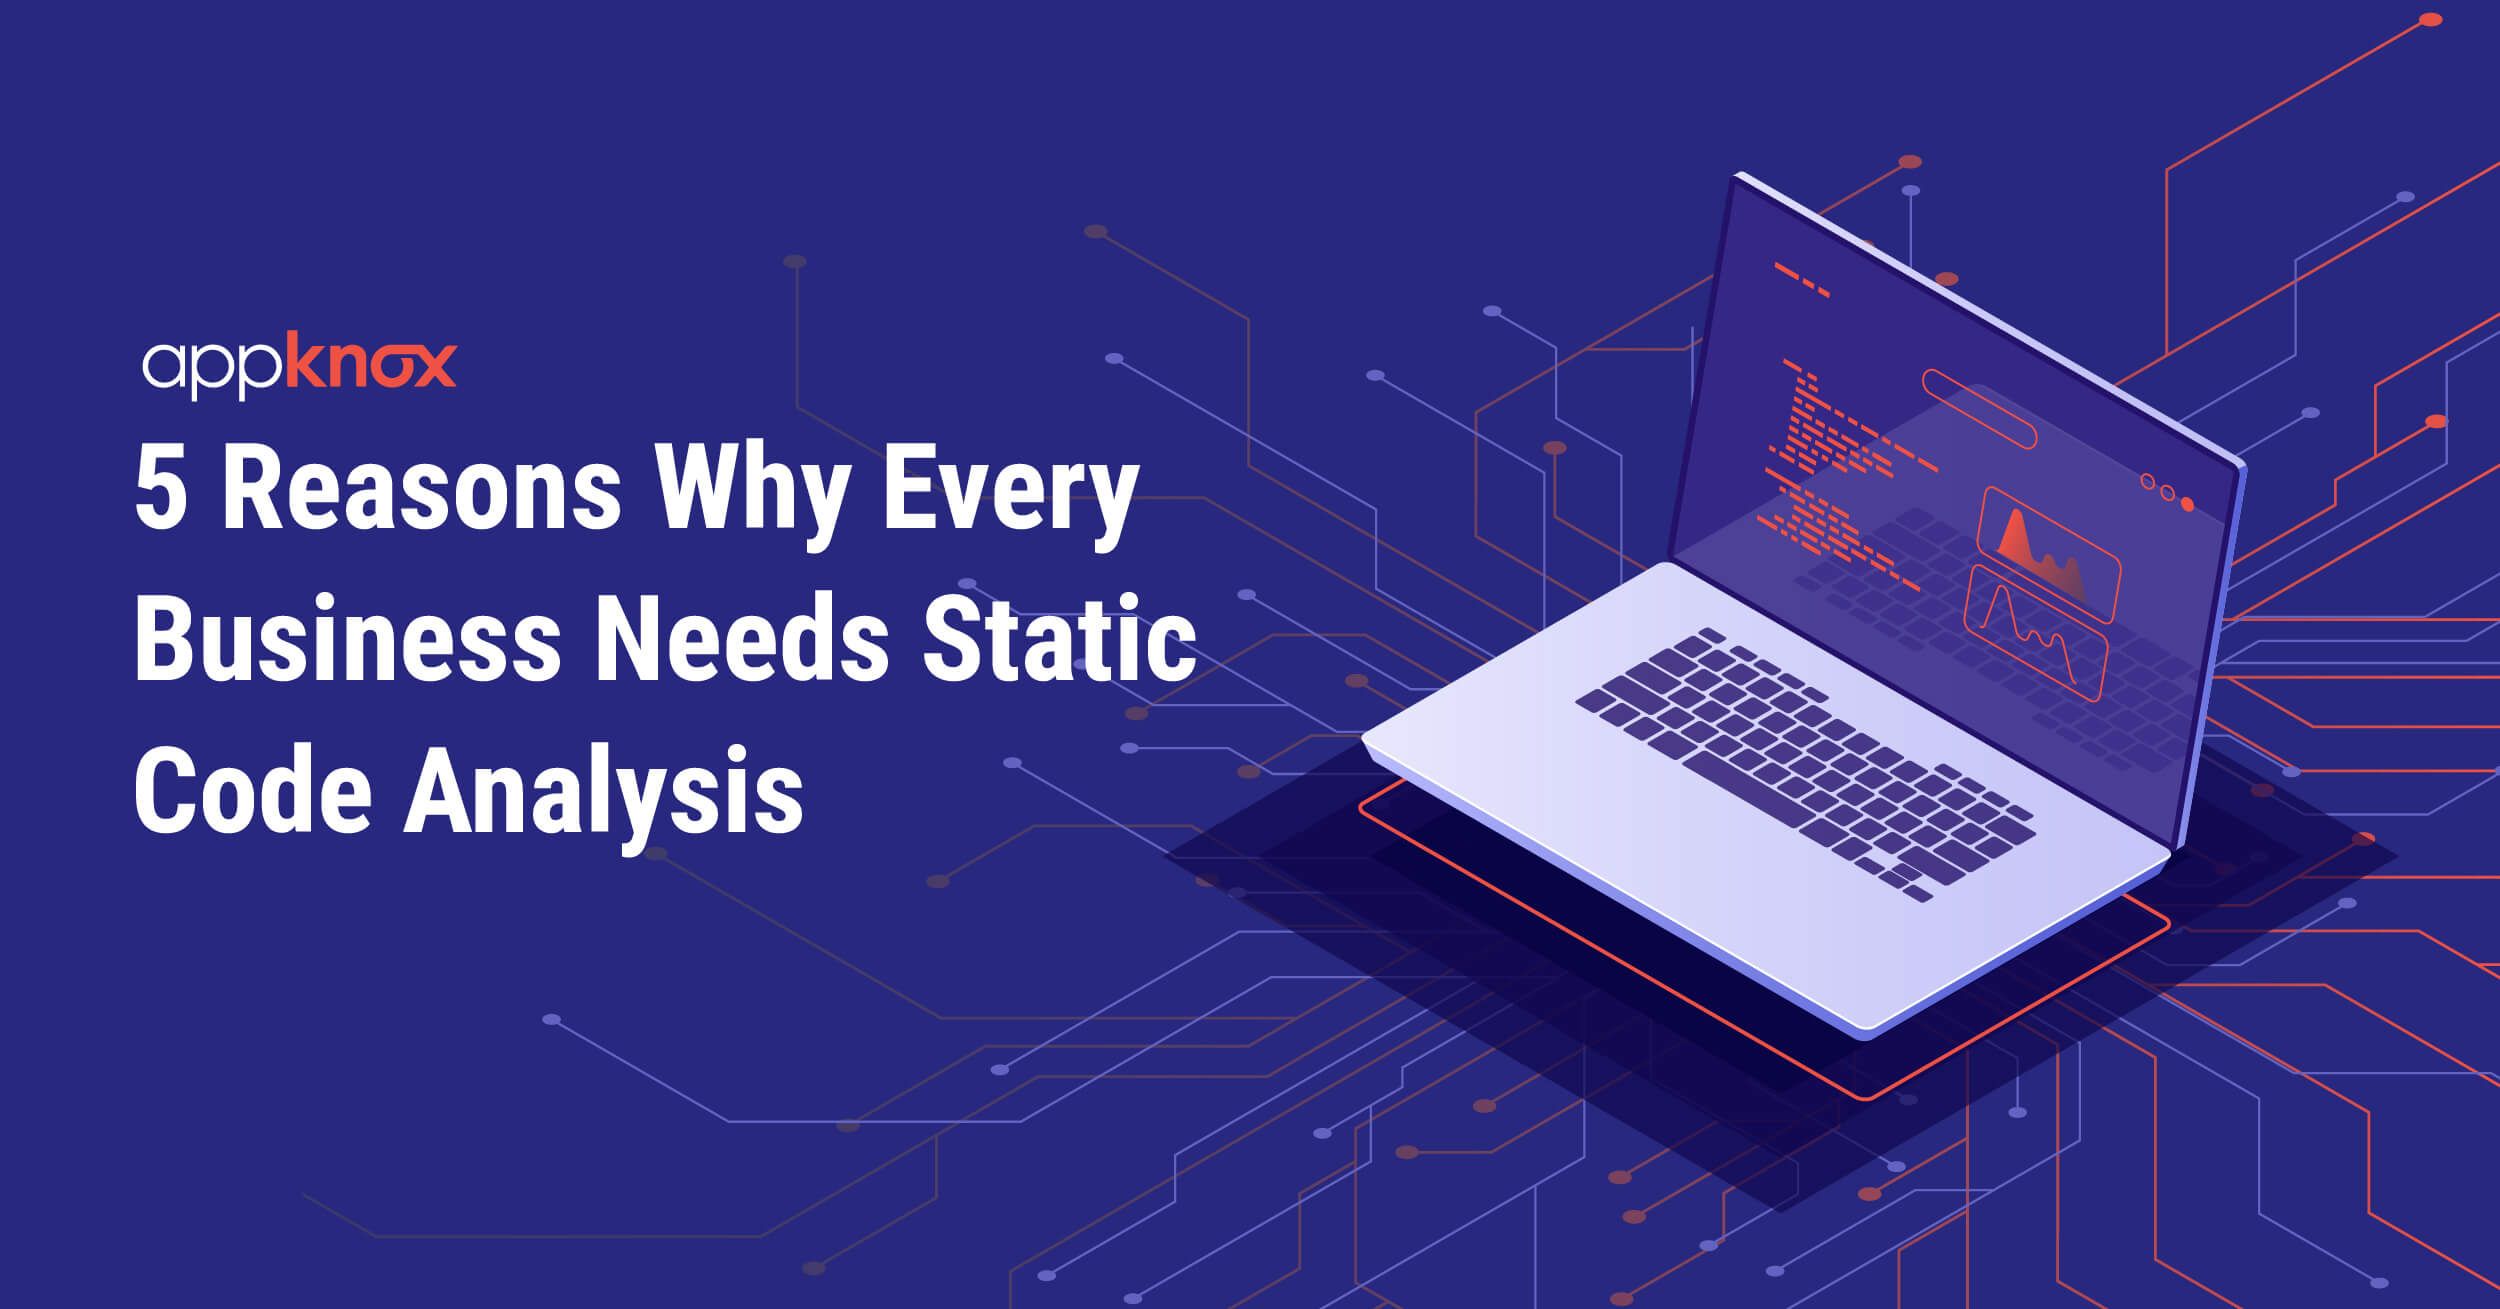 5 reasons why every business needs static code analysis